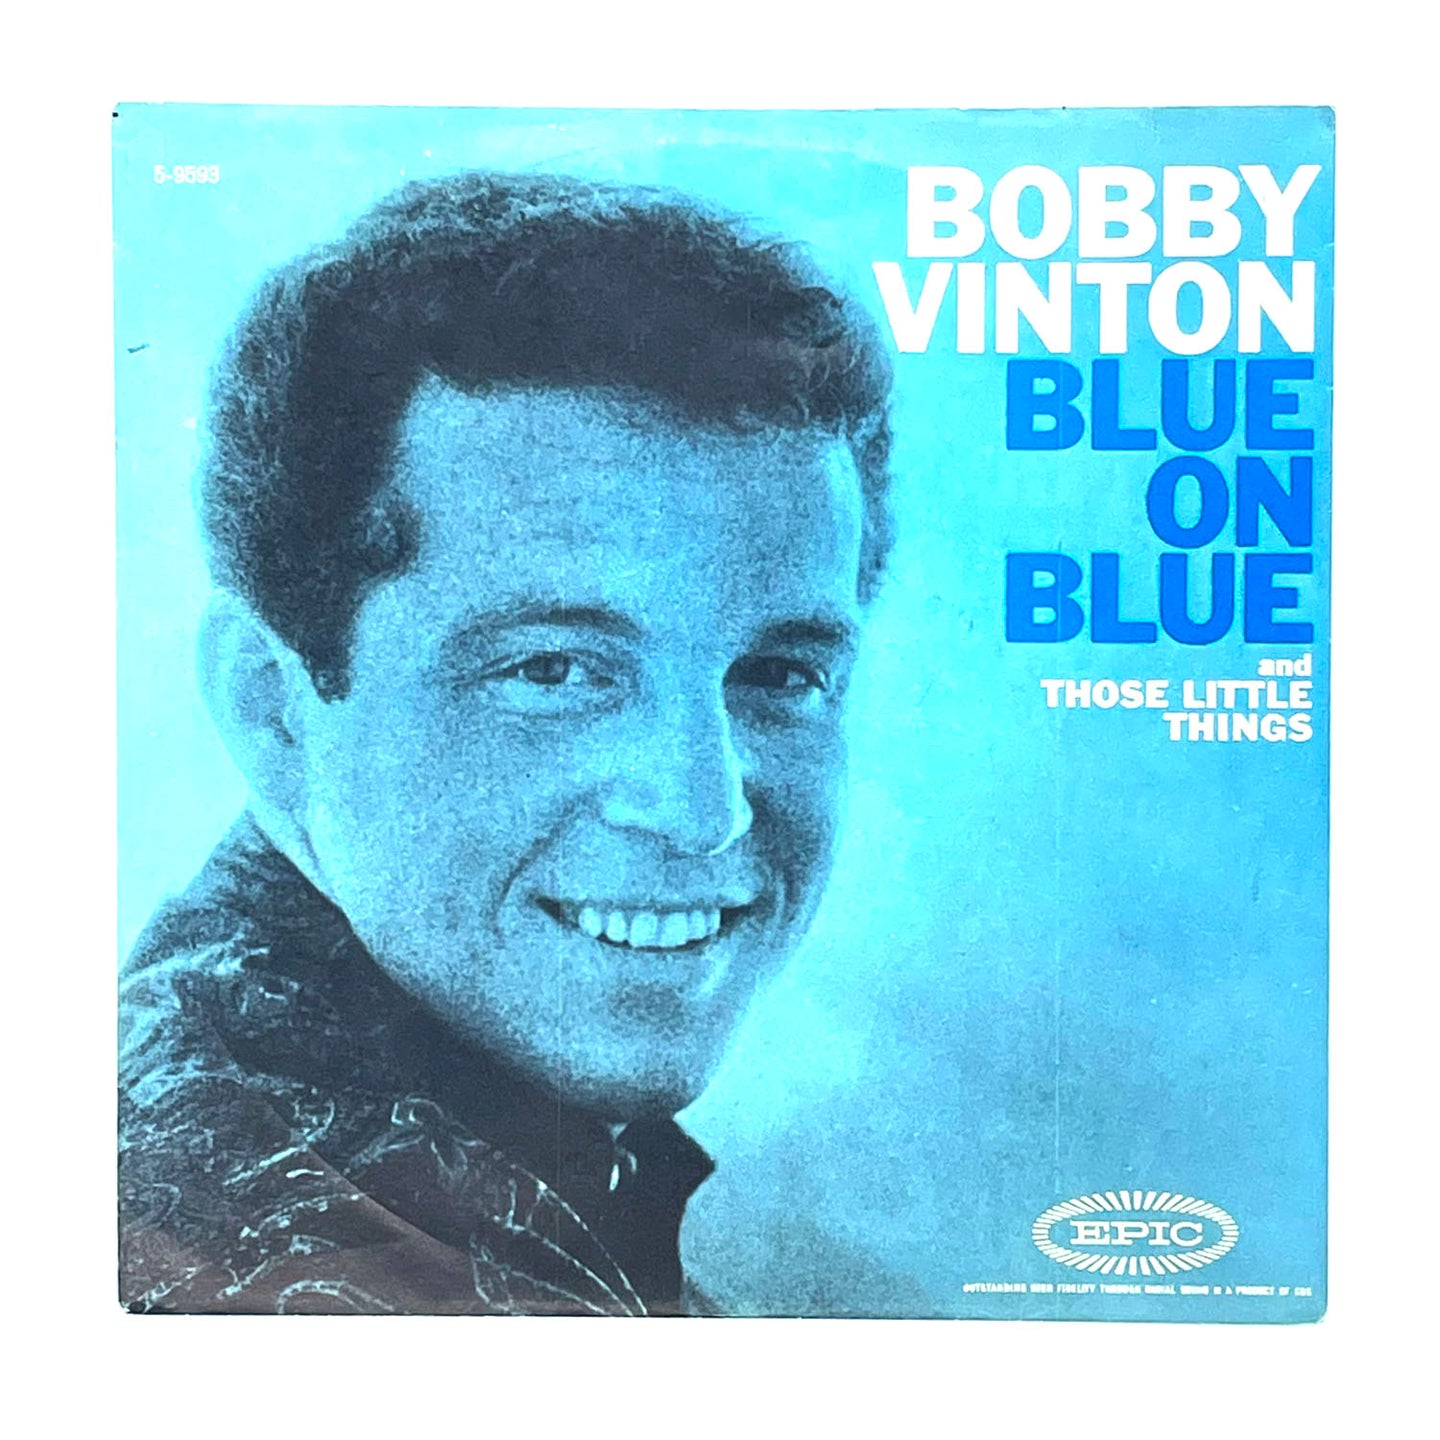 • Bobby Vinton : BLUE ON BLUE/ THOSE LITTLE THINGS